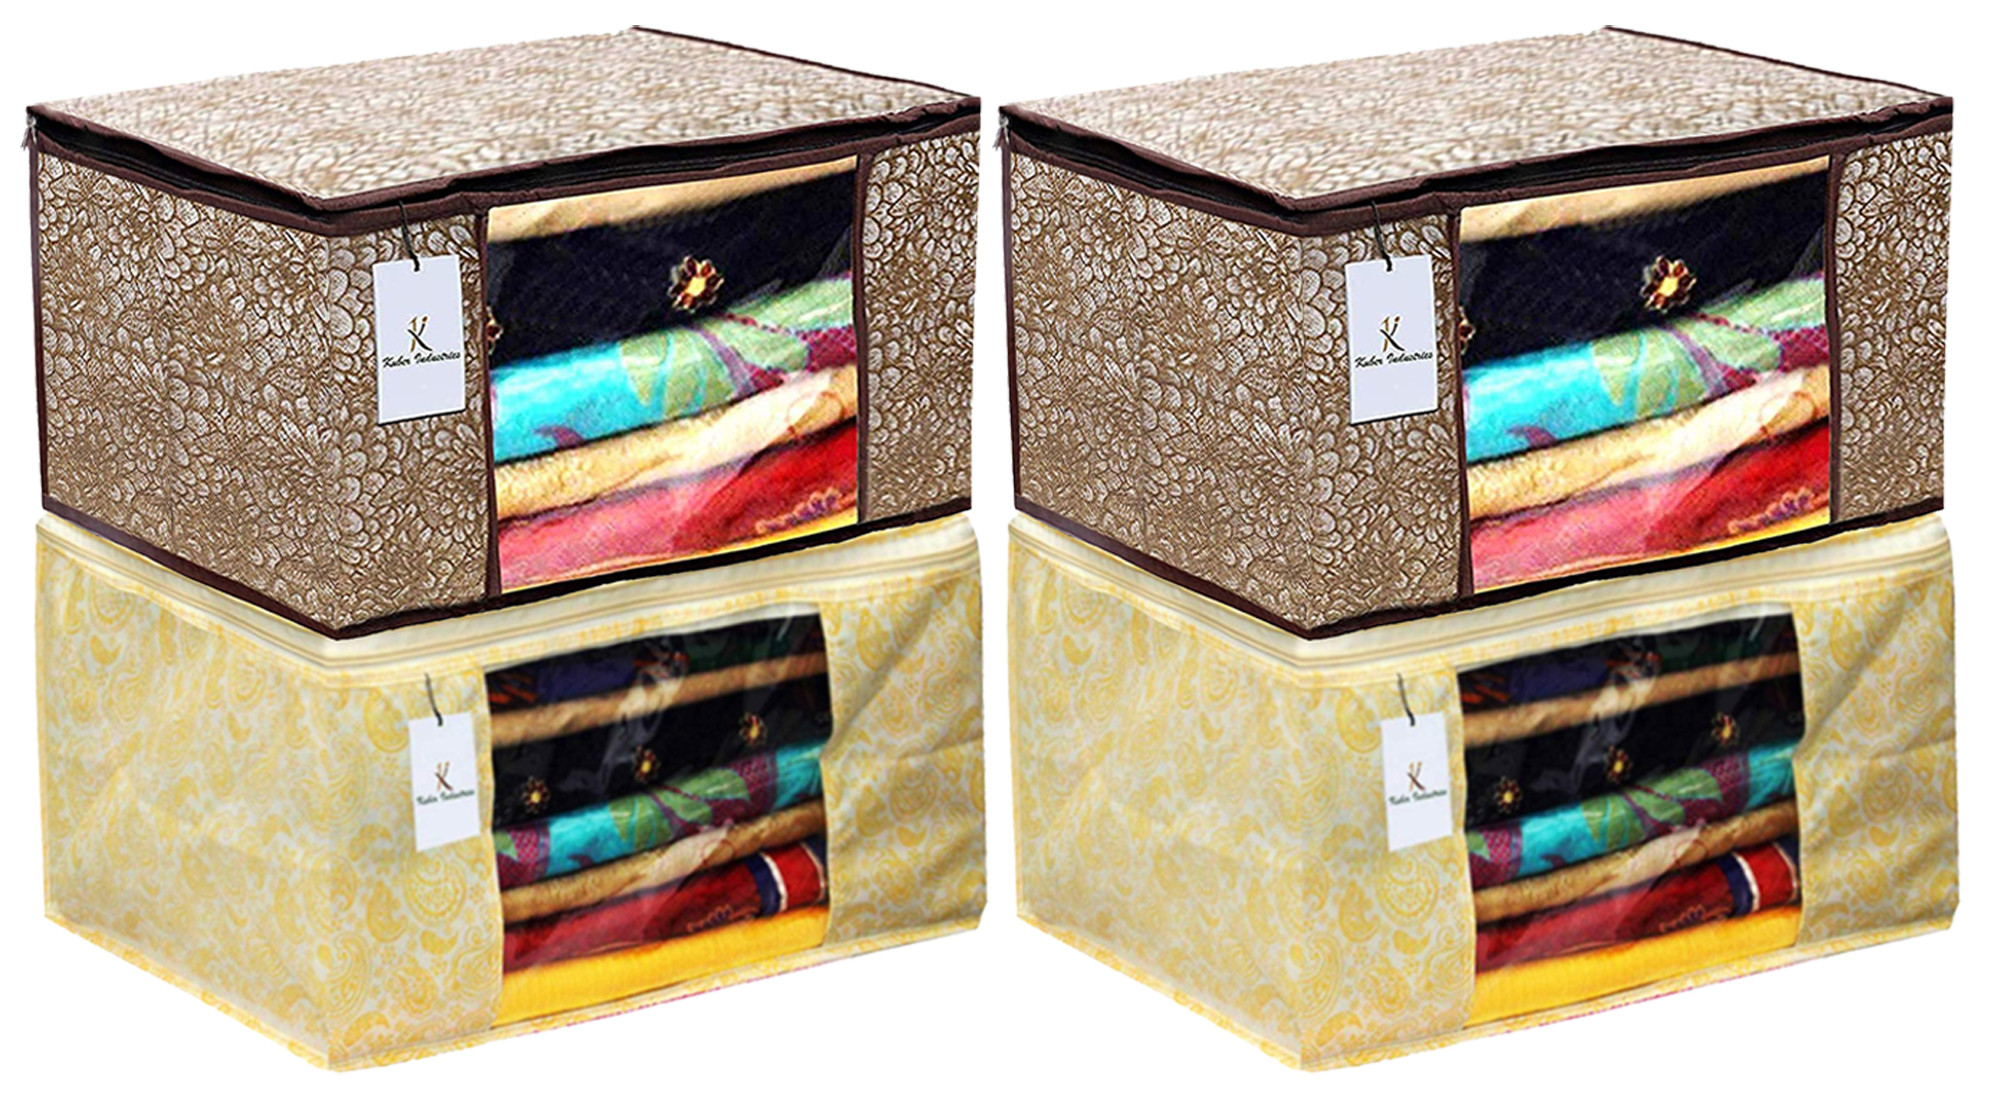 Kuber Industries Metalic Printed Non Woven Fabric Saree Cover Set with Transparent Window, Extra Large, Golden Brown & Gold -CTKTC40781